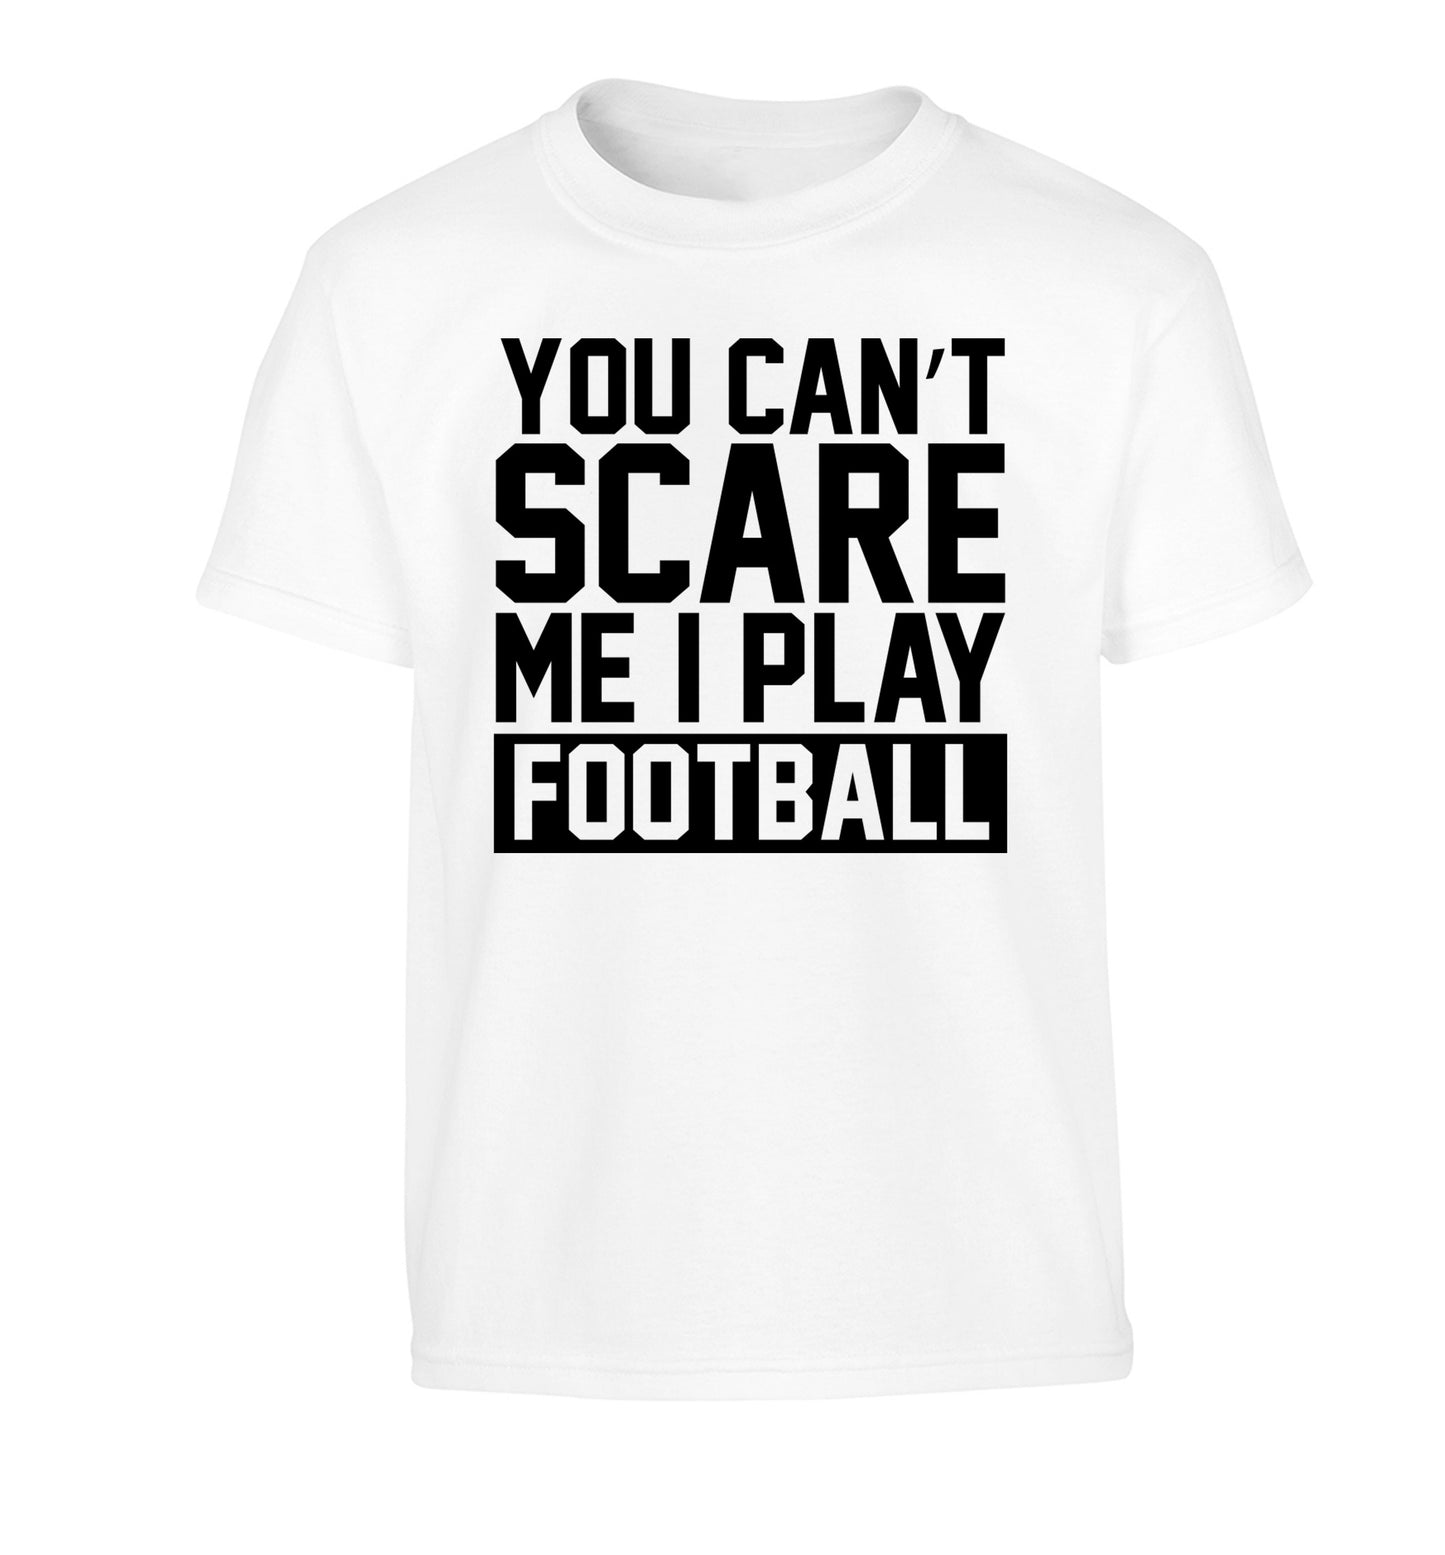 You can't scare me I play football Children's white Tshirt 12-14 Years